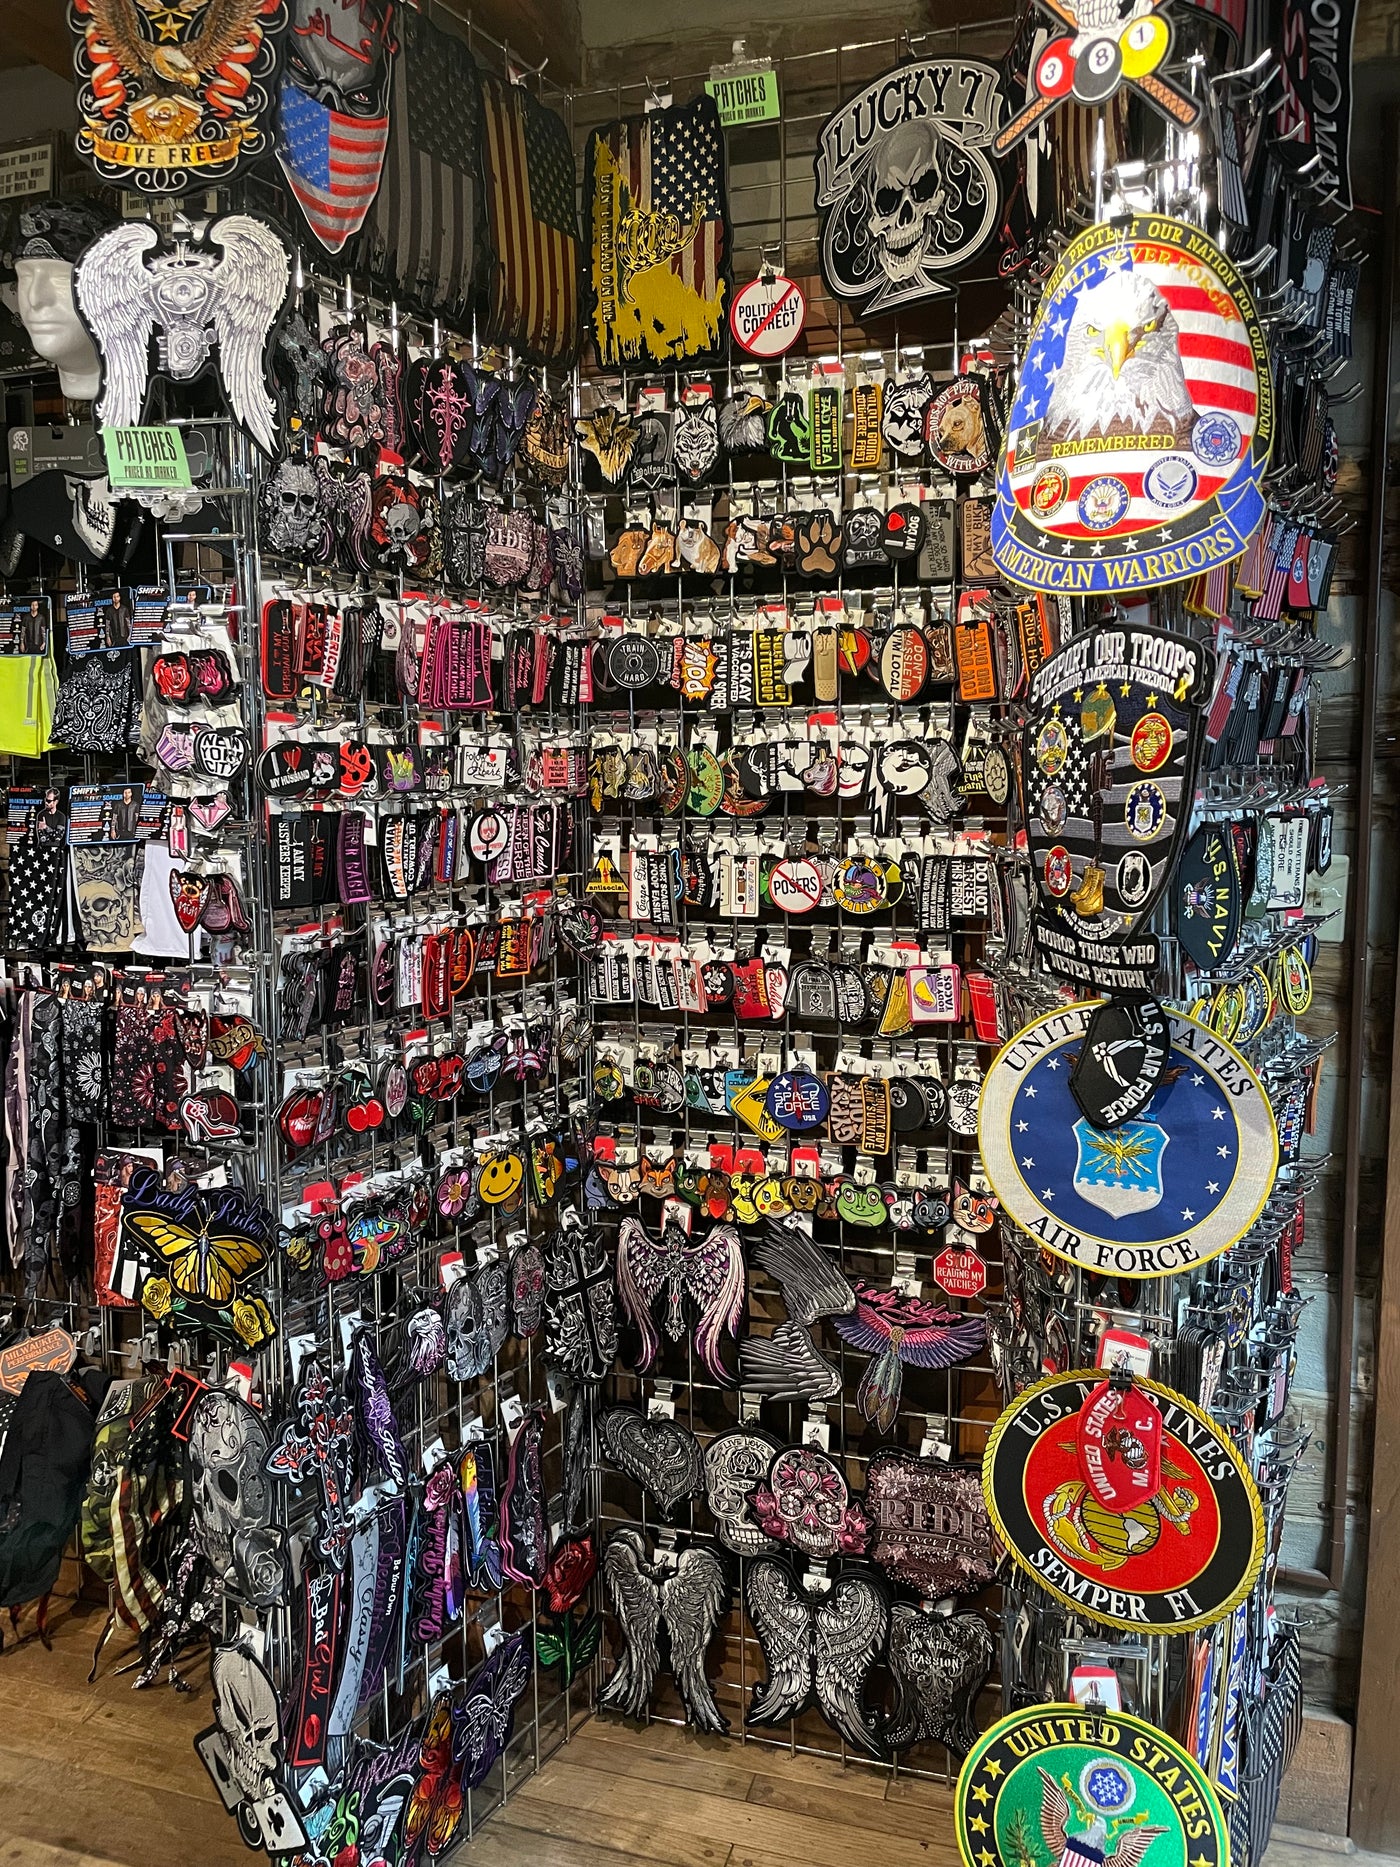 Our retail shop stocks approx. 500 styles of patches: including Military, 2nd Amendment, Large Center patches, Sayings, Ladies, Skulls, Native American, and many more! Some patches pictured MAY NOT be available due to our selection will change throughout the year because vendors continually come out with NEW patches. We try to keep our selection current! These items are in stock in our shop but not for online purchase.